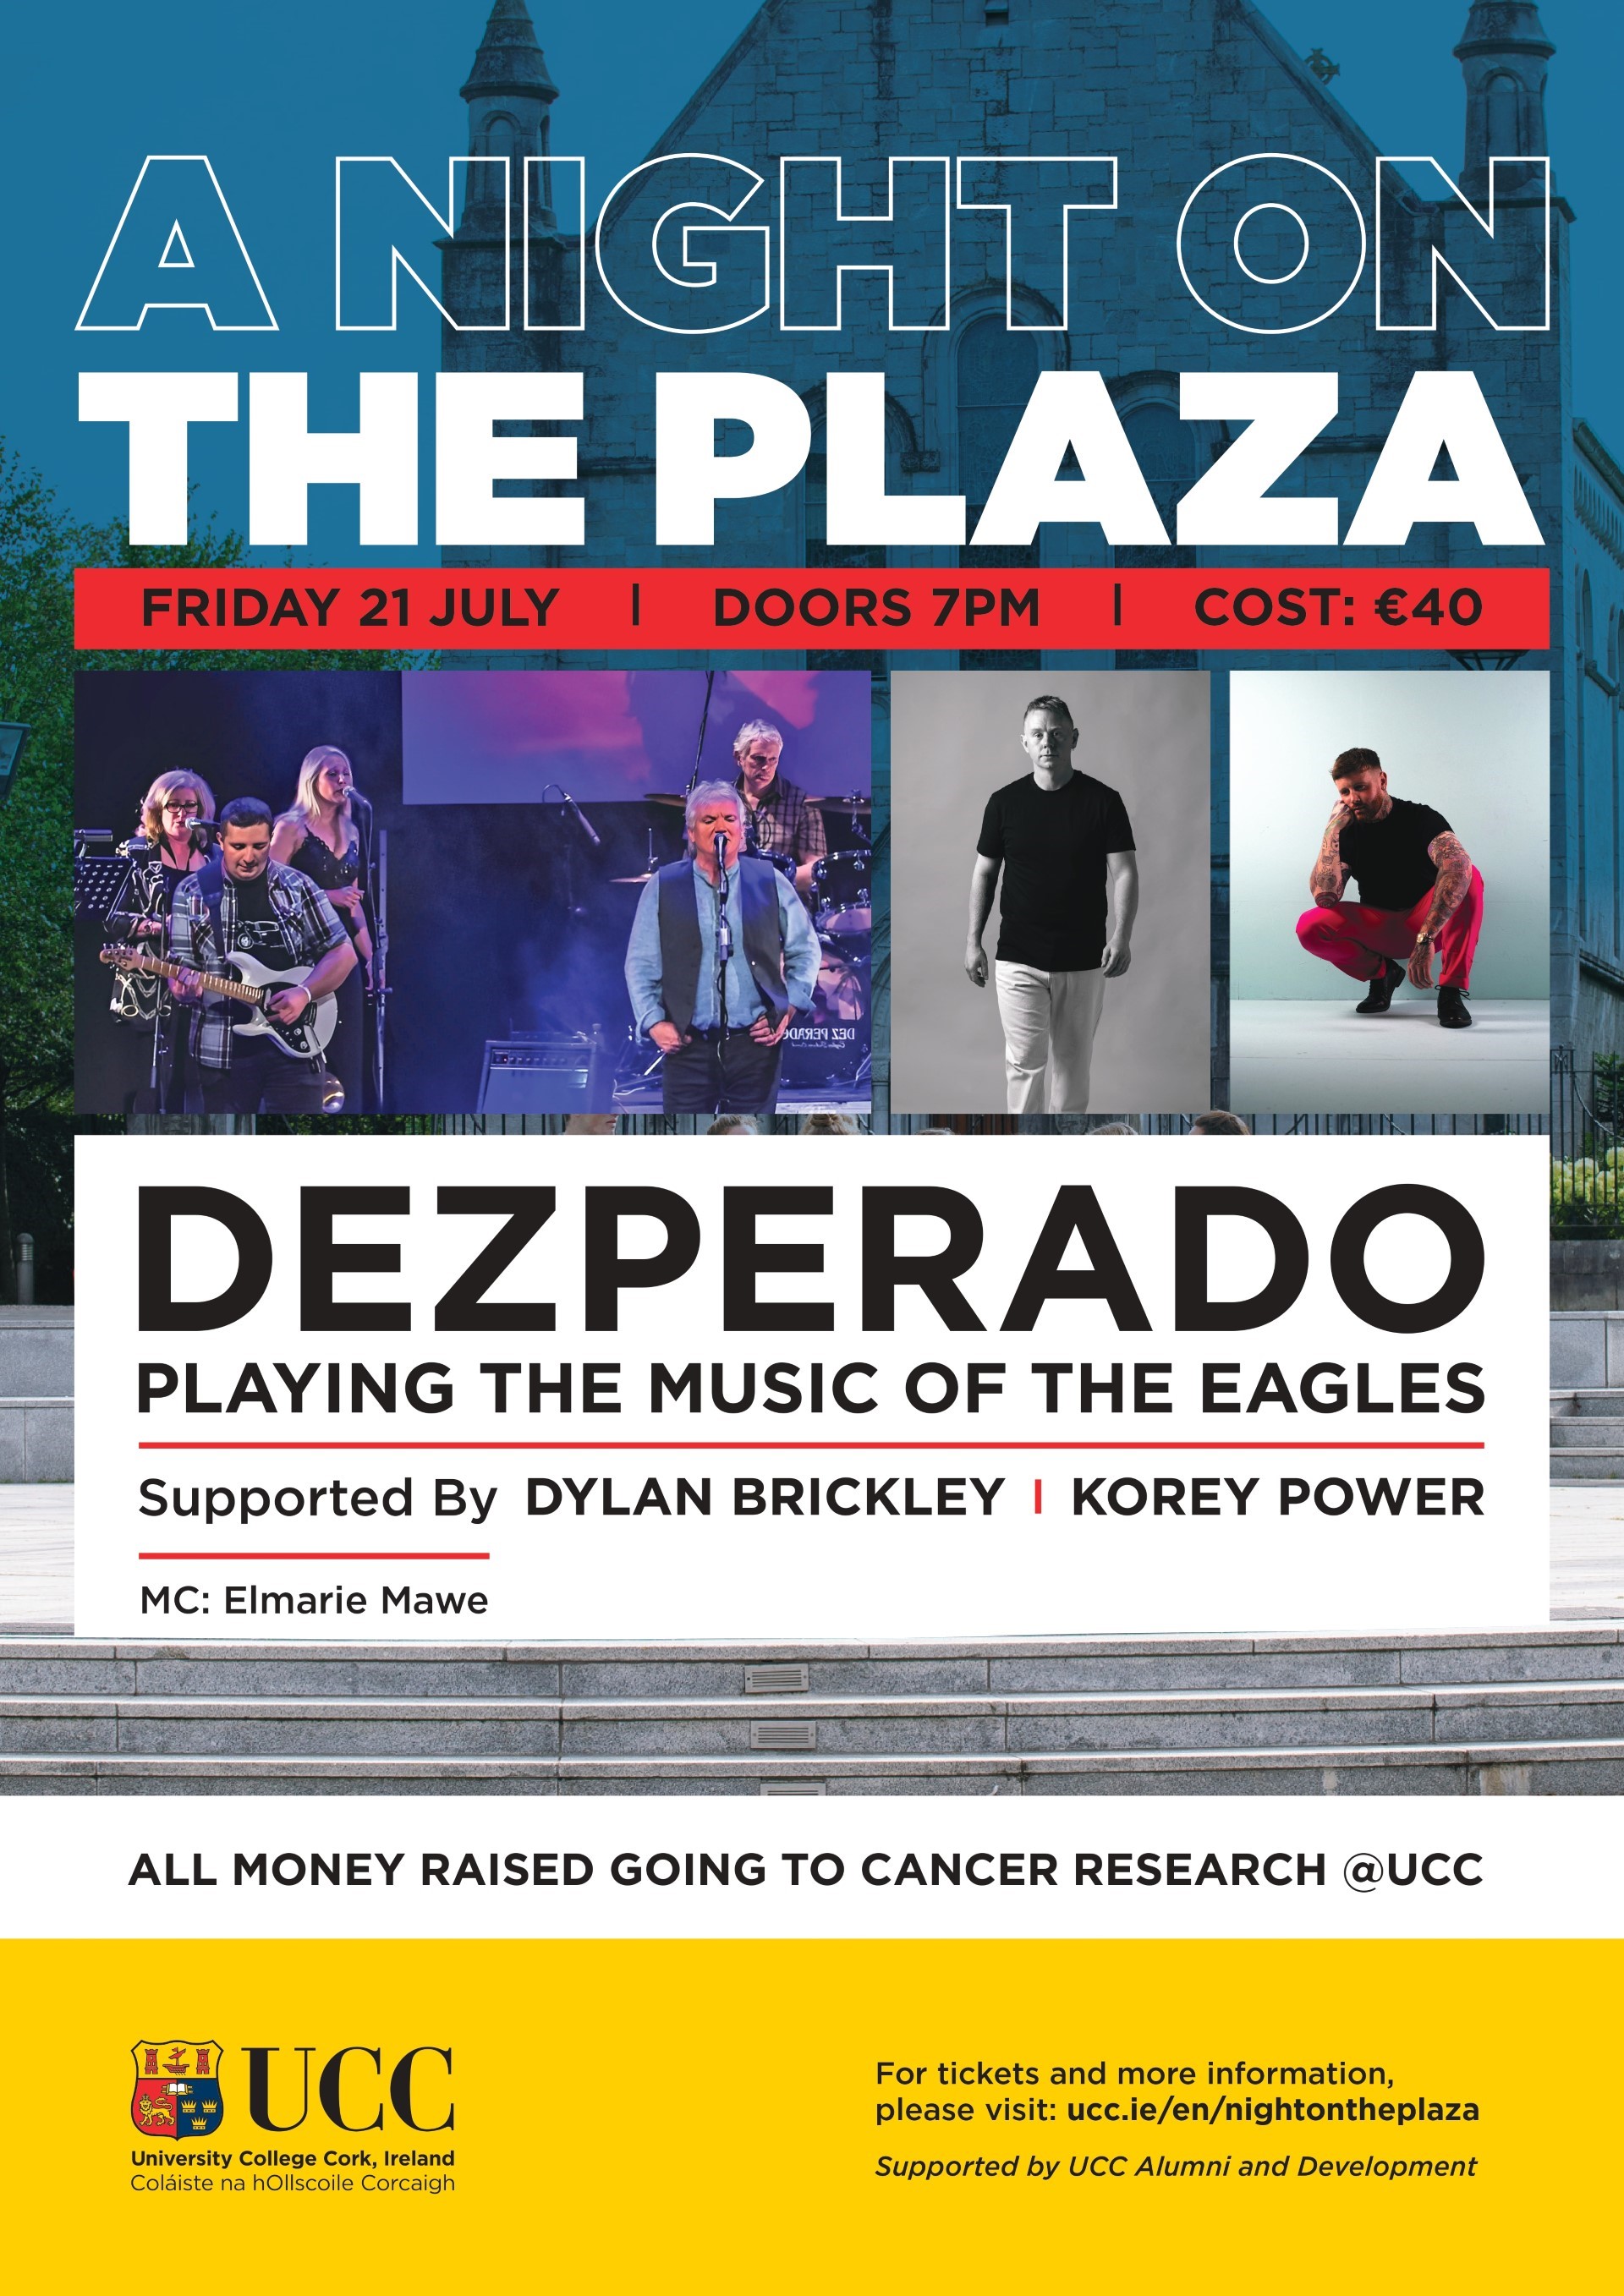 'A Night on the Plaza' fundraiser in aid of Cancer Research @UCC will take place on Friday 21st July